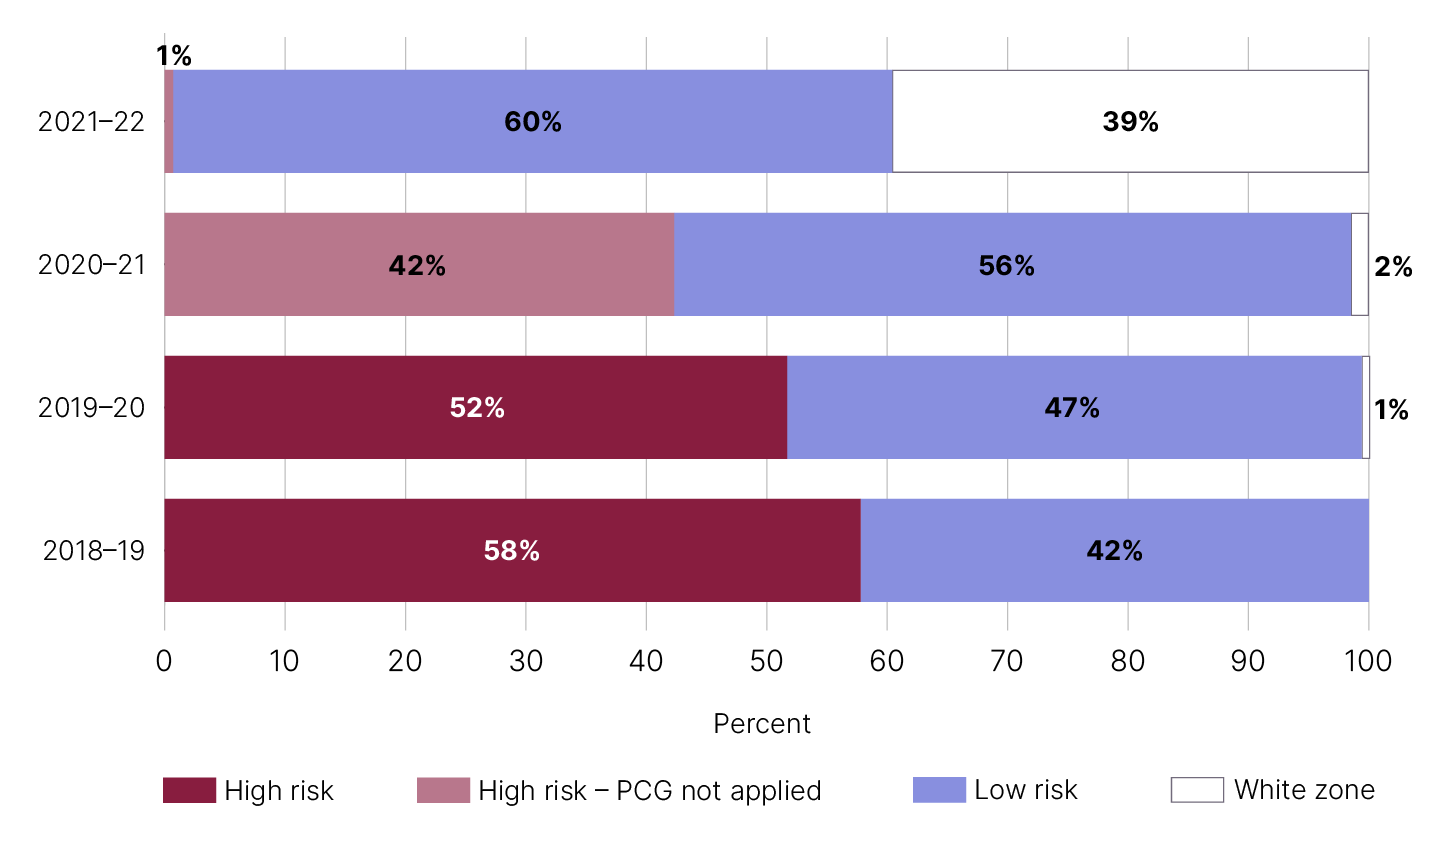 2021-22 results. High risk - PCG not applied = 1%. Low risk = 60%. White zone = 39%.  2020-21 results. High risk - PCG not applied = 42%. Low risk = 56%. White zone = 2%.  2019-20 results. High risk = 52%. Low risk = 47%. White zone = 1%.  2018-19 results. High risk = 58%. Low risk = 42%.